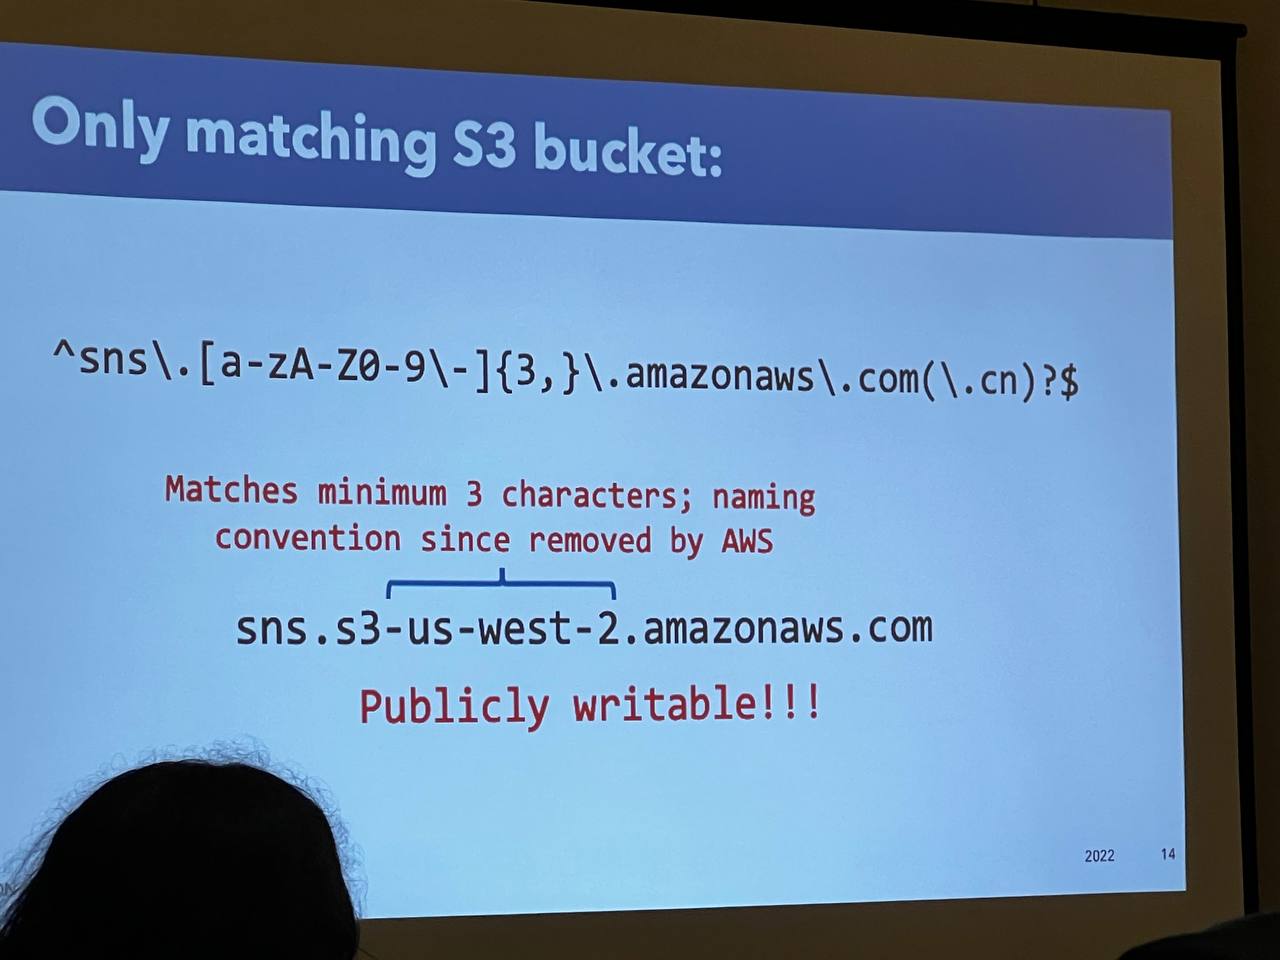 They show they can create an S3 bucket that matches AWS's SNS regex.